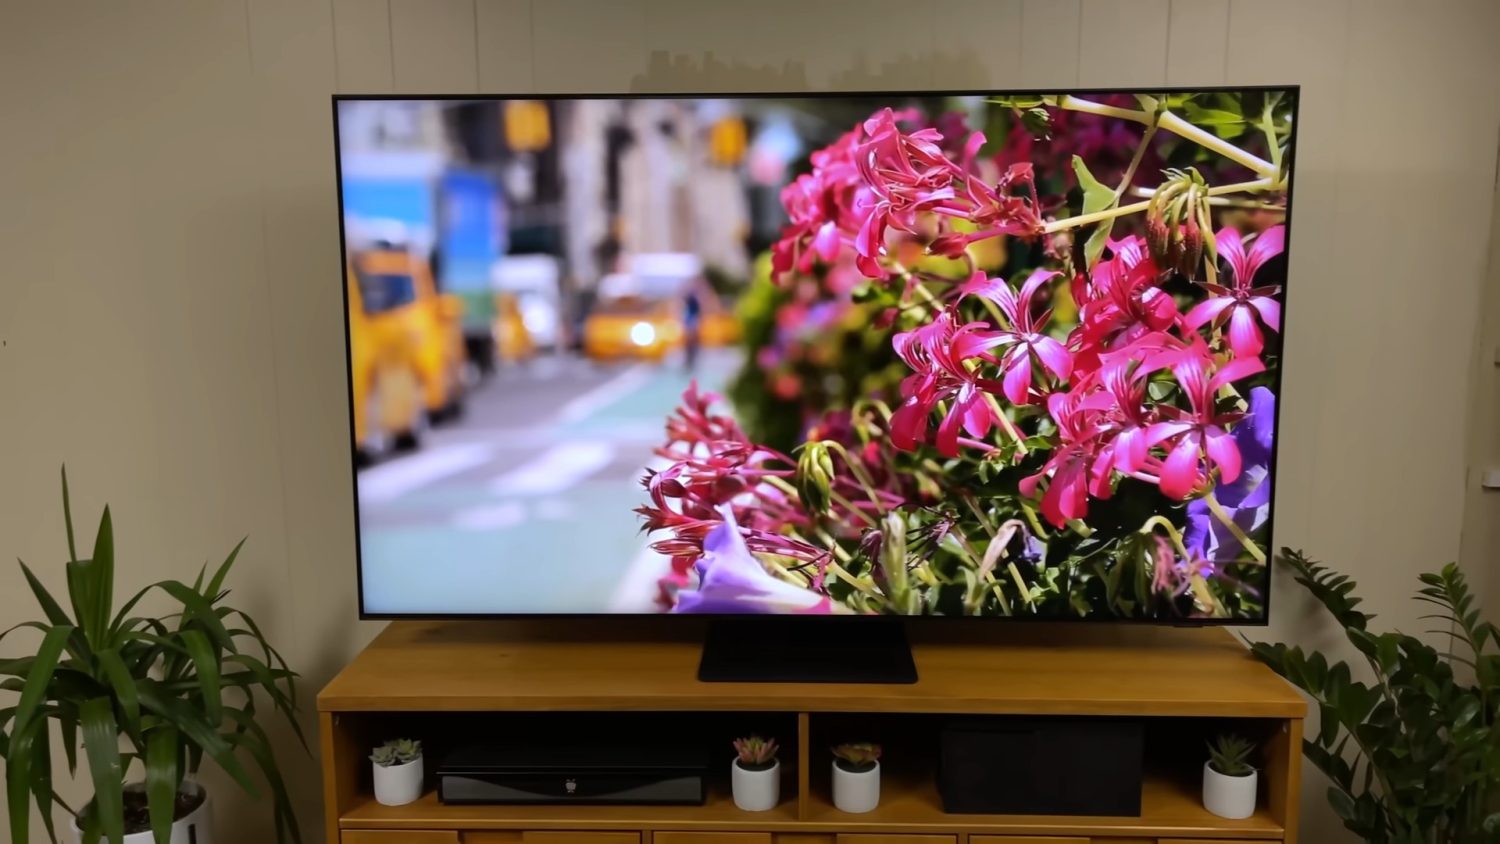 Samsung's best 4K TV of 2021 is QLED (QN90A review)